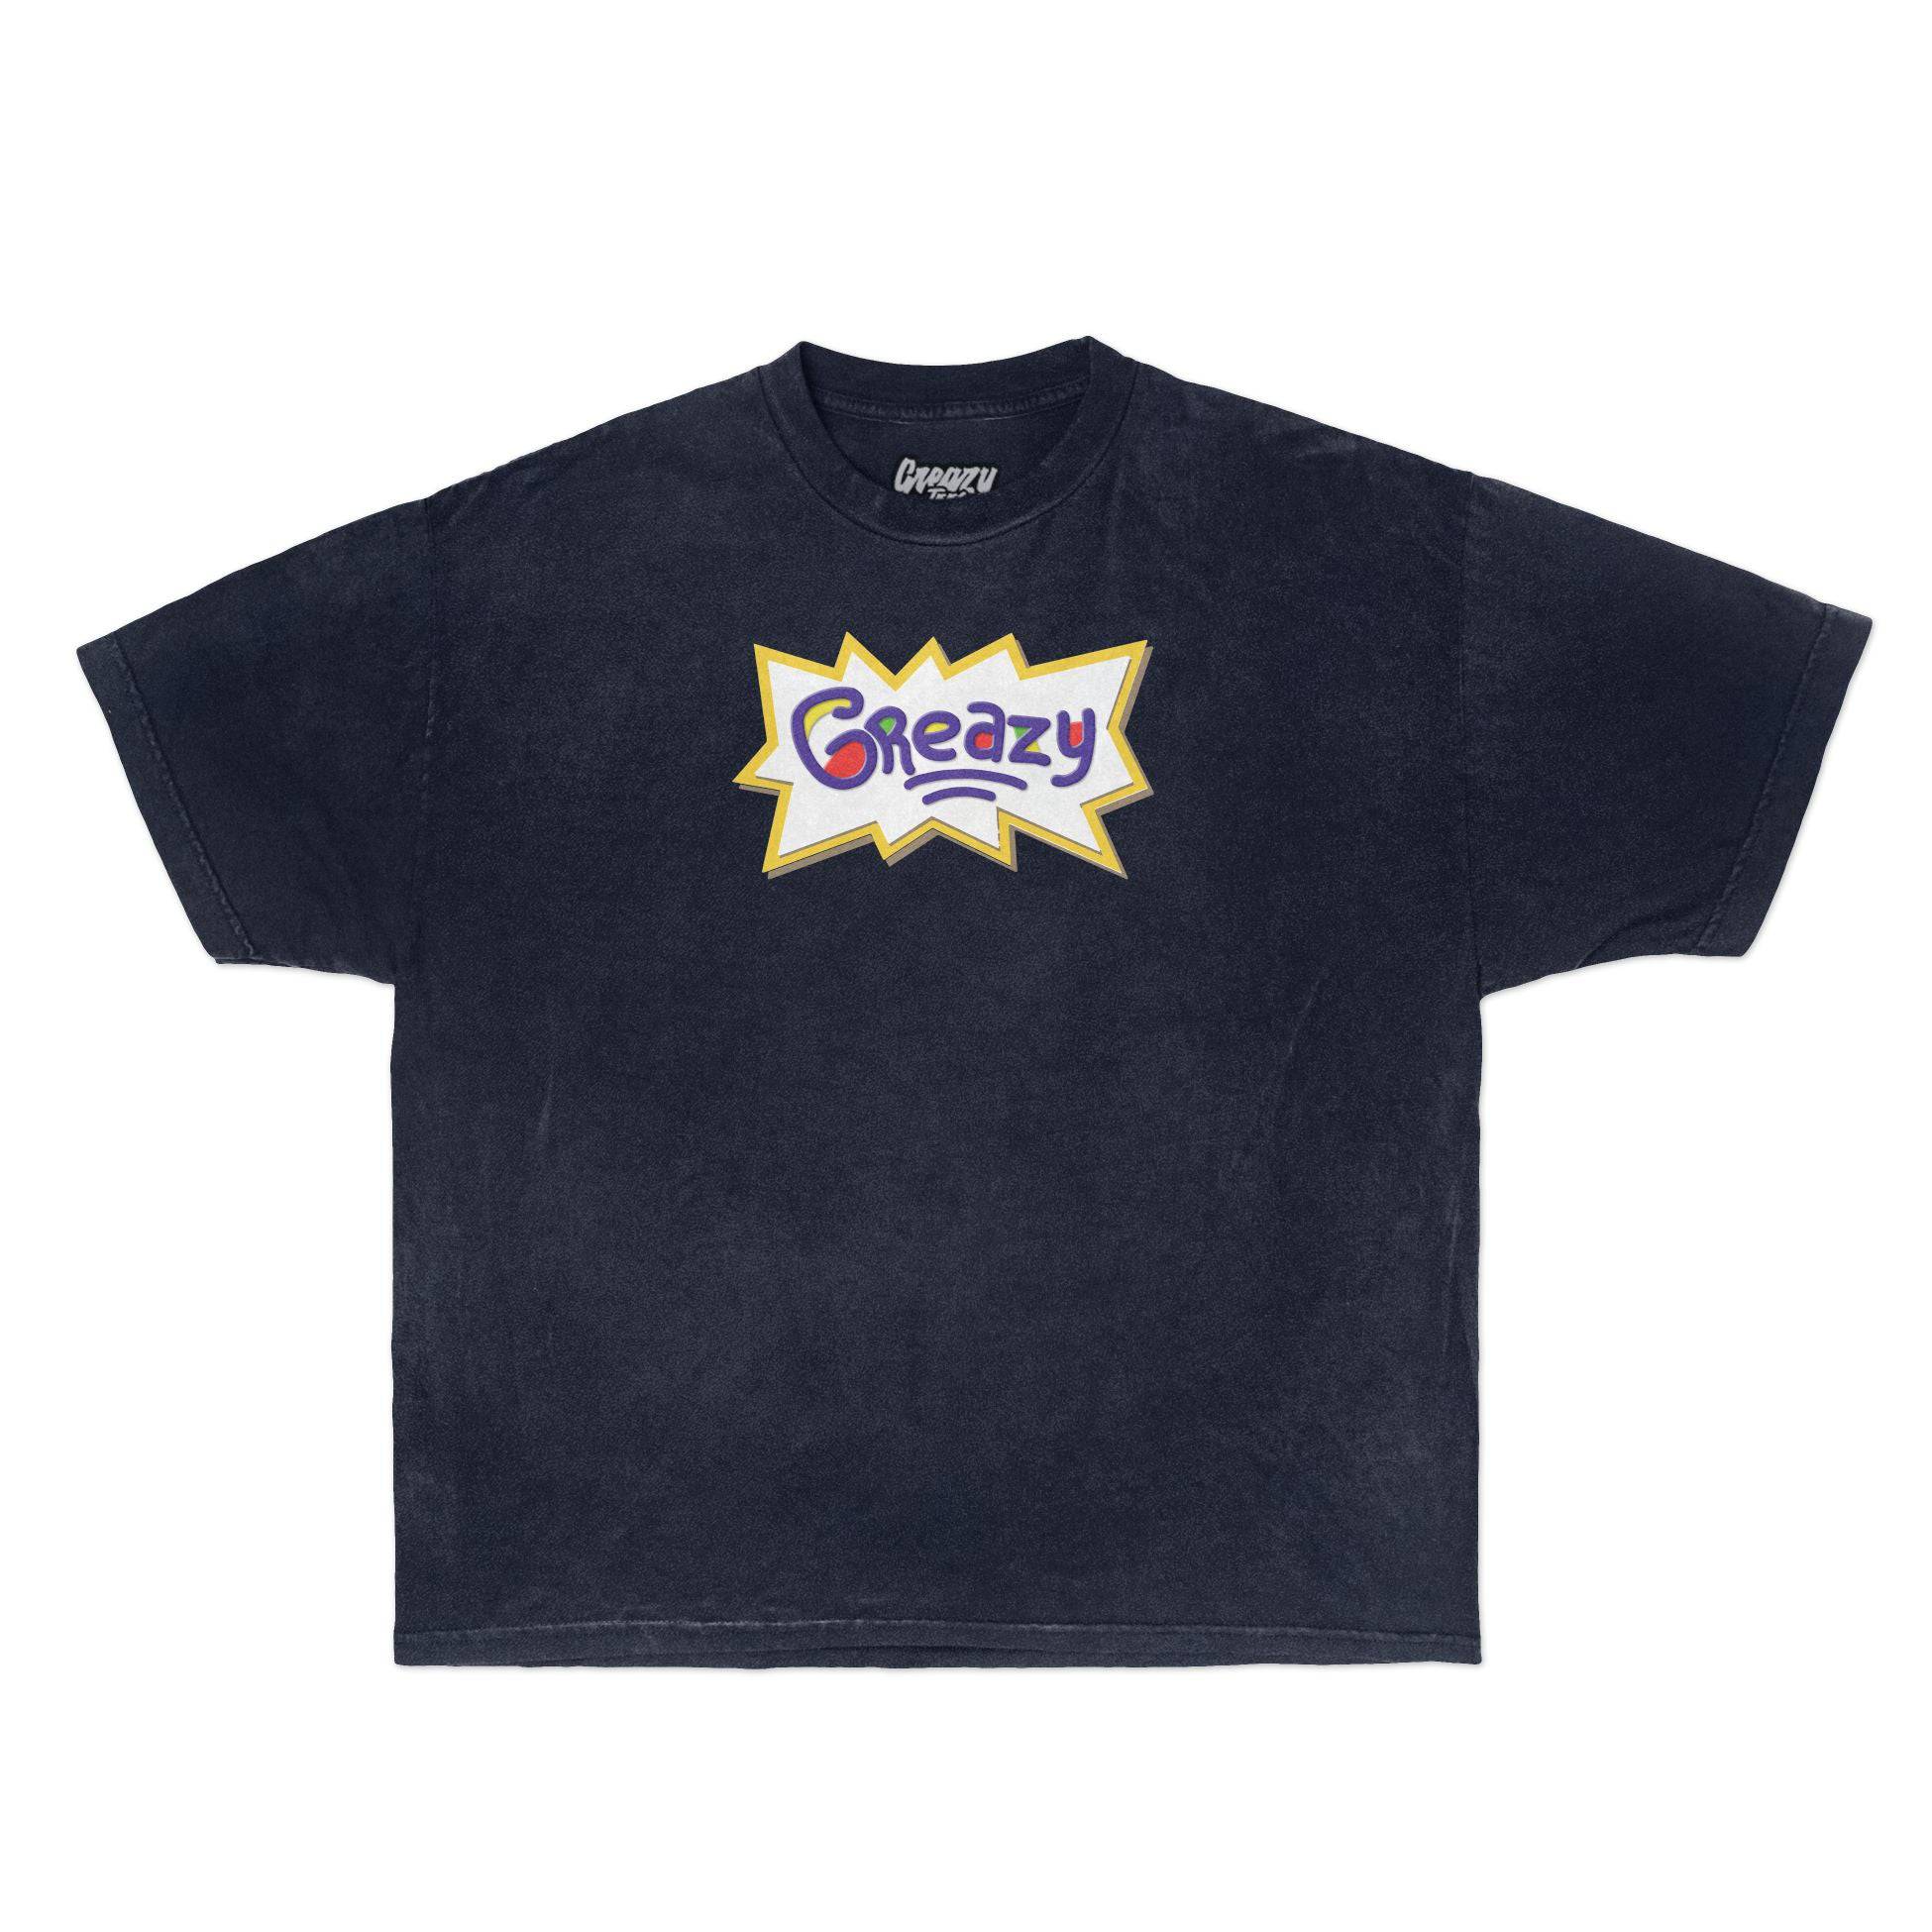 Childs Play Tee Tee Greazy Tees XS Navy Oversized